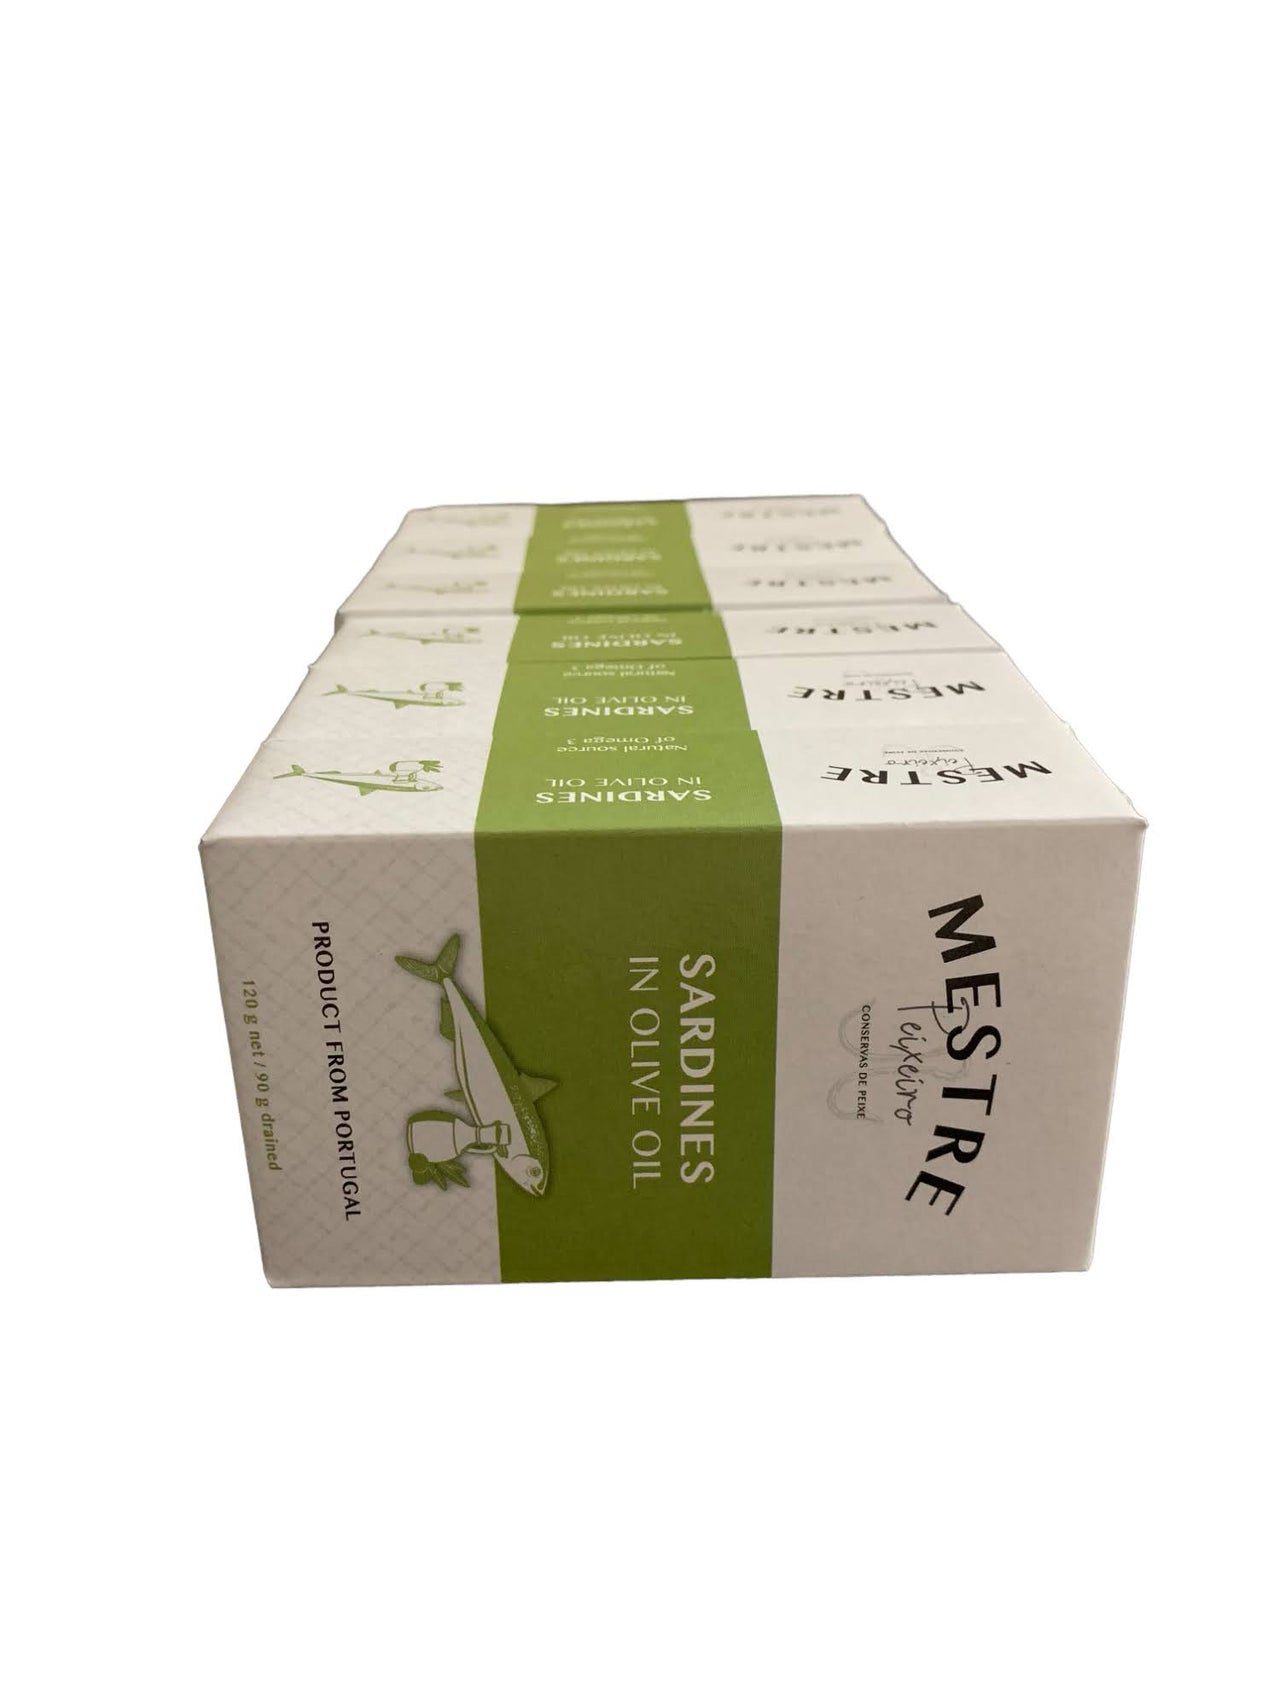 Mestre Sardines in Olive Oil - 6 Pack - TinCanFish